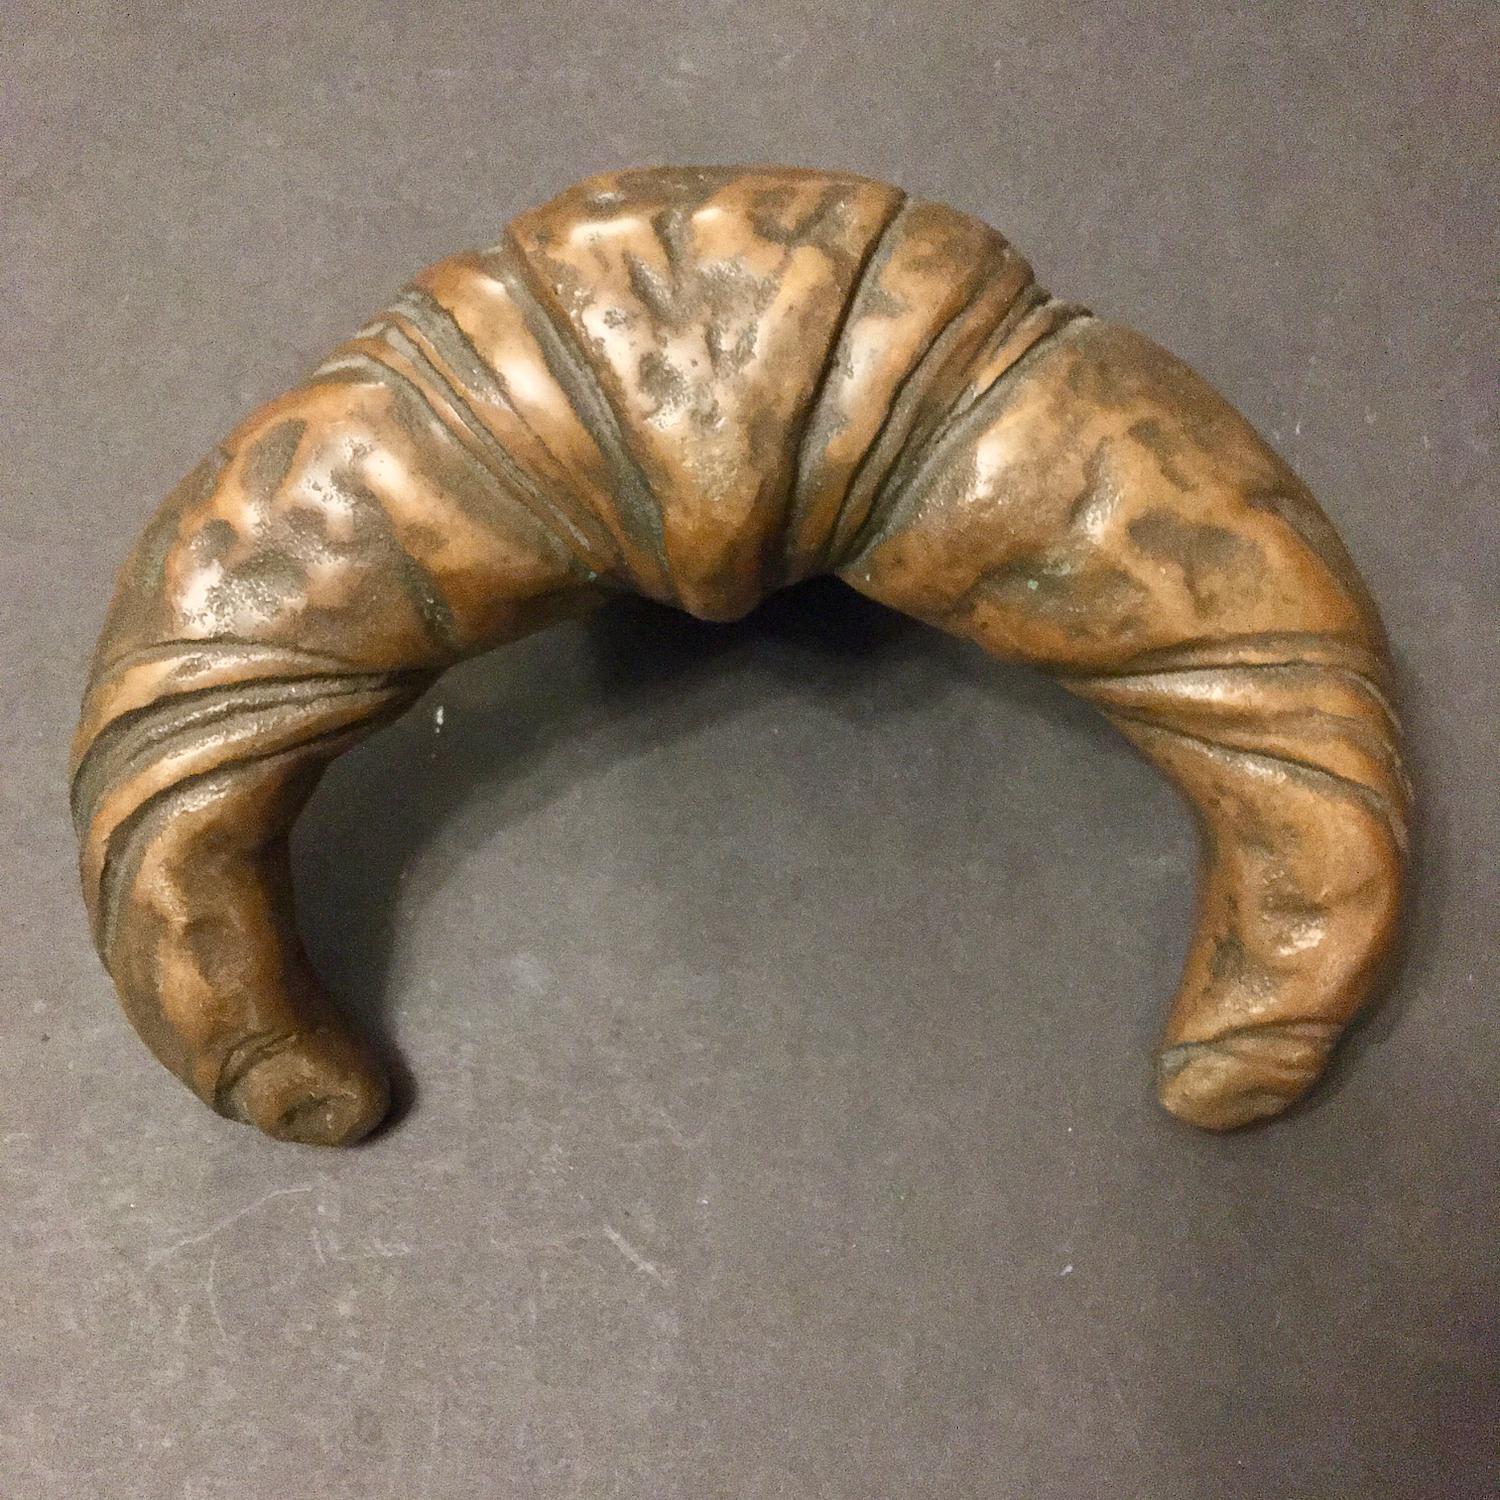 Cast Large Bronze Door Handle in the Shape of a Croissant, 20th Century, European